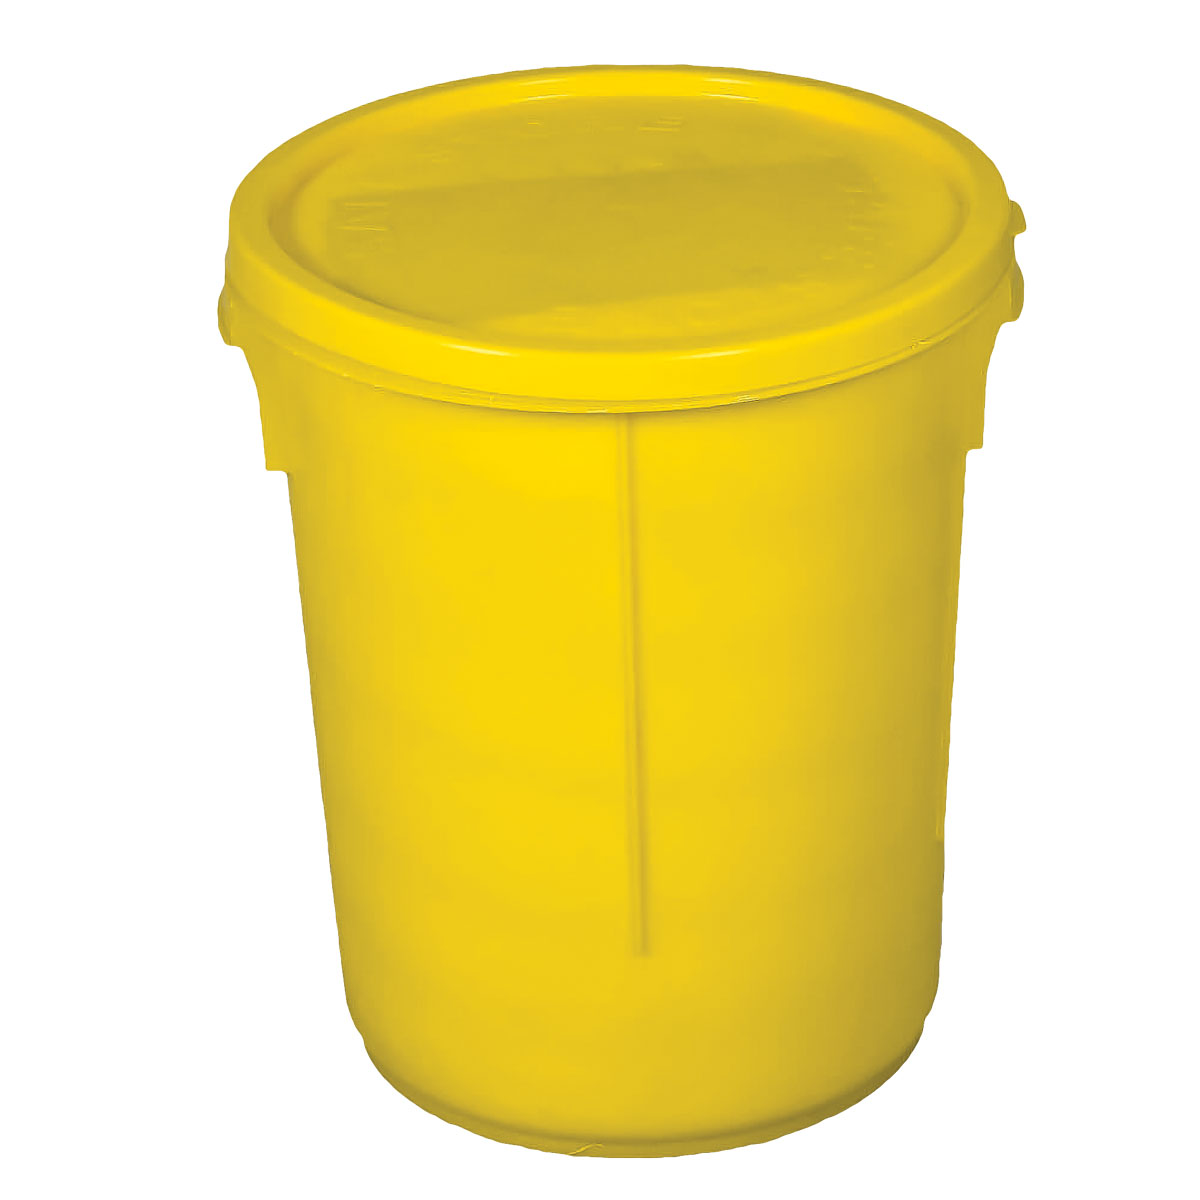 Empty Plastic Drum and Lid (Yellow) - 35 Litre